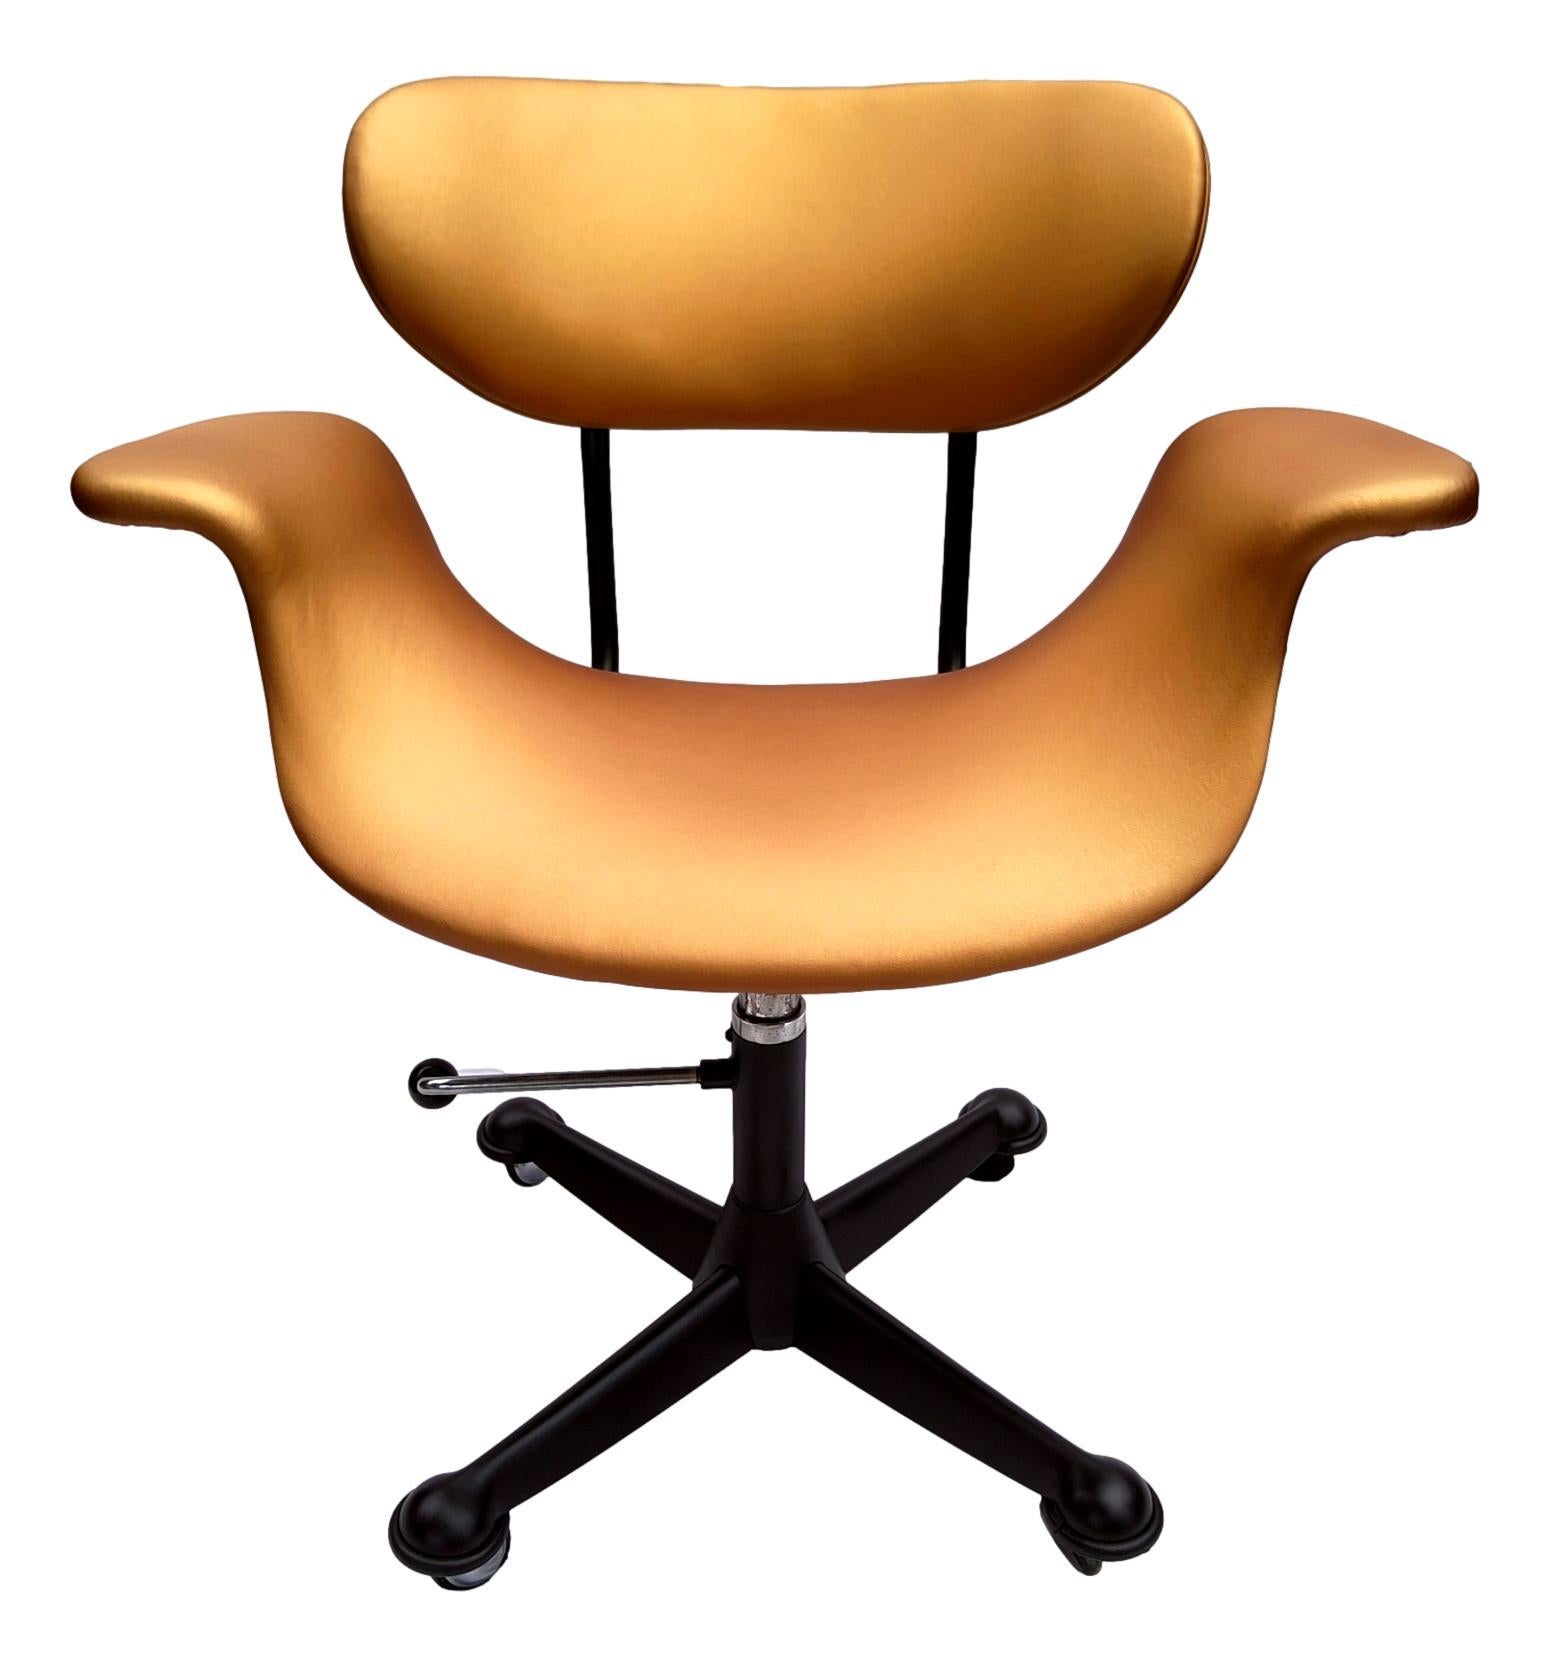 splendid presidential swivel chair, design gastone rinaldi for rima di padova, italy, 1970

made on black lacquered metal frame, seat ending in two arms with harmonious and attractive design, exposed wood and beige/brown/gold fabric upholstery,